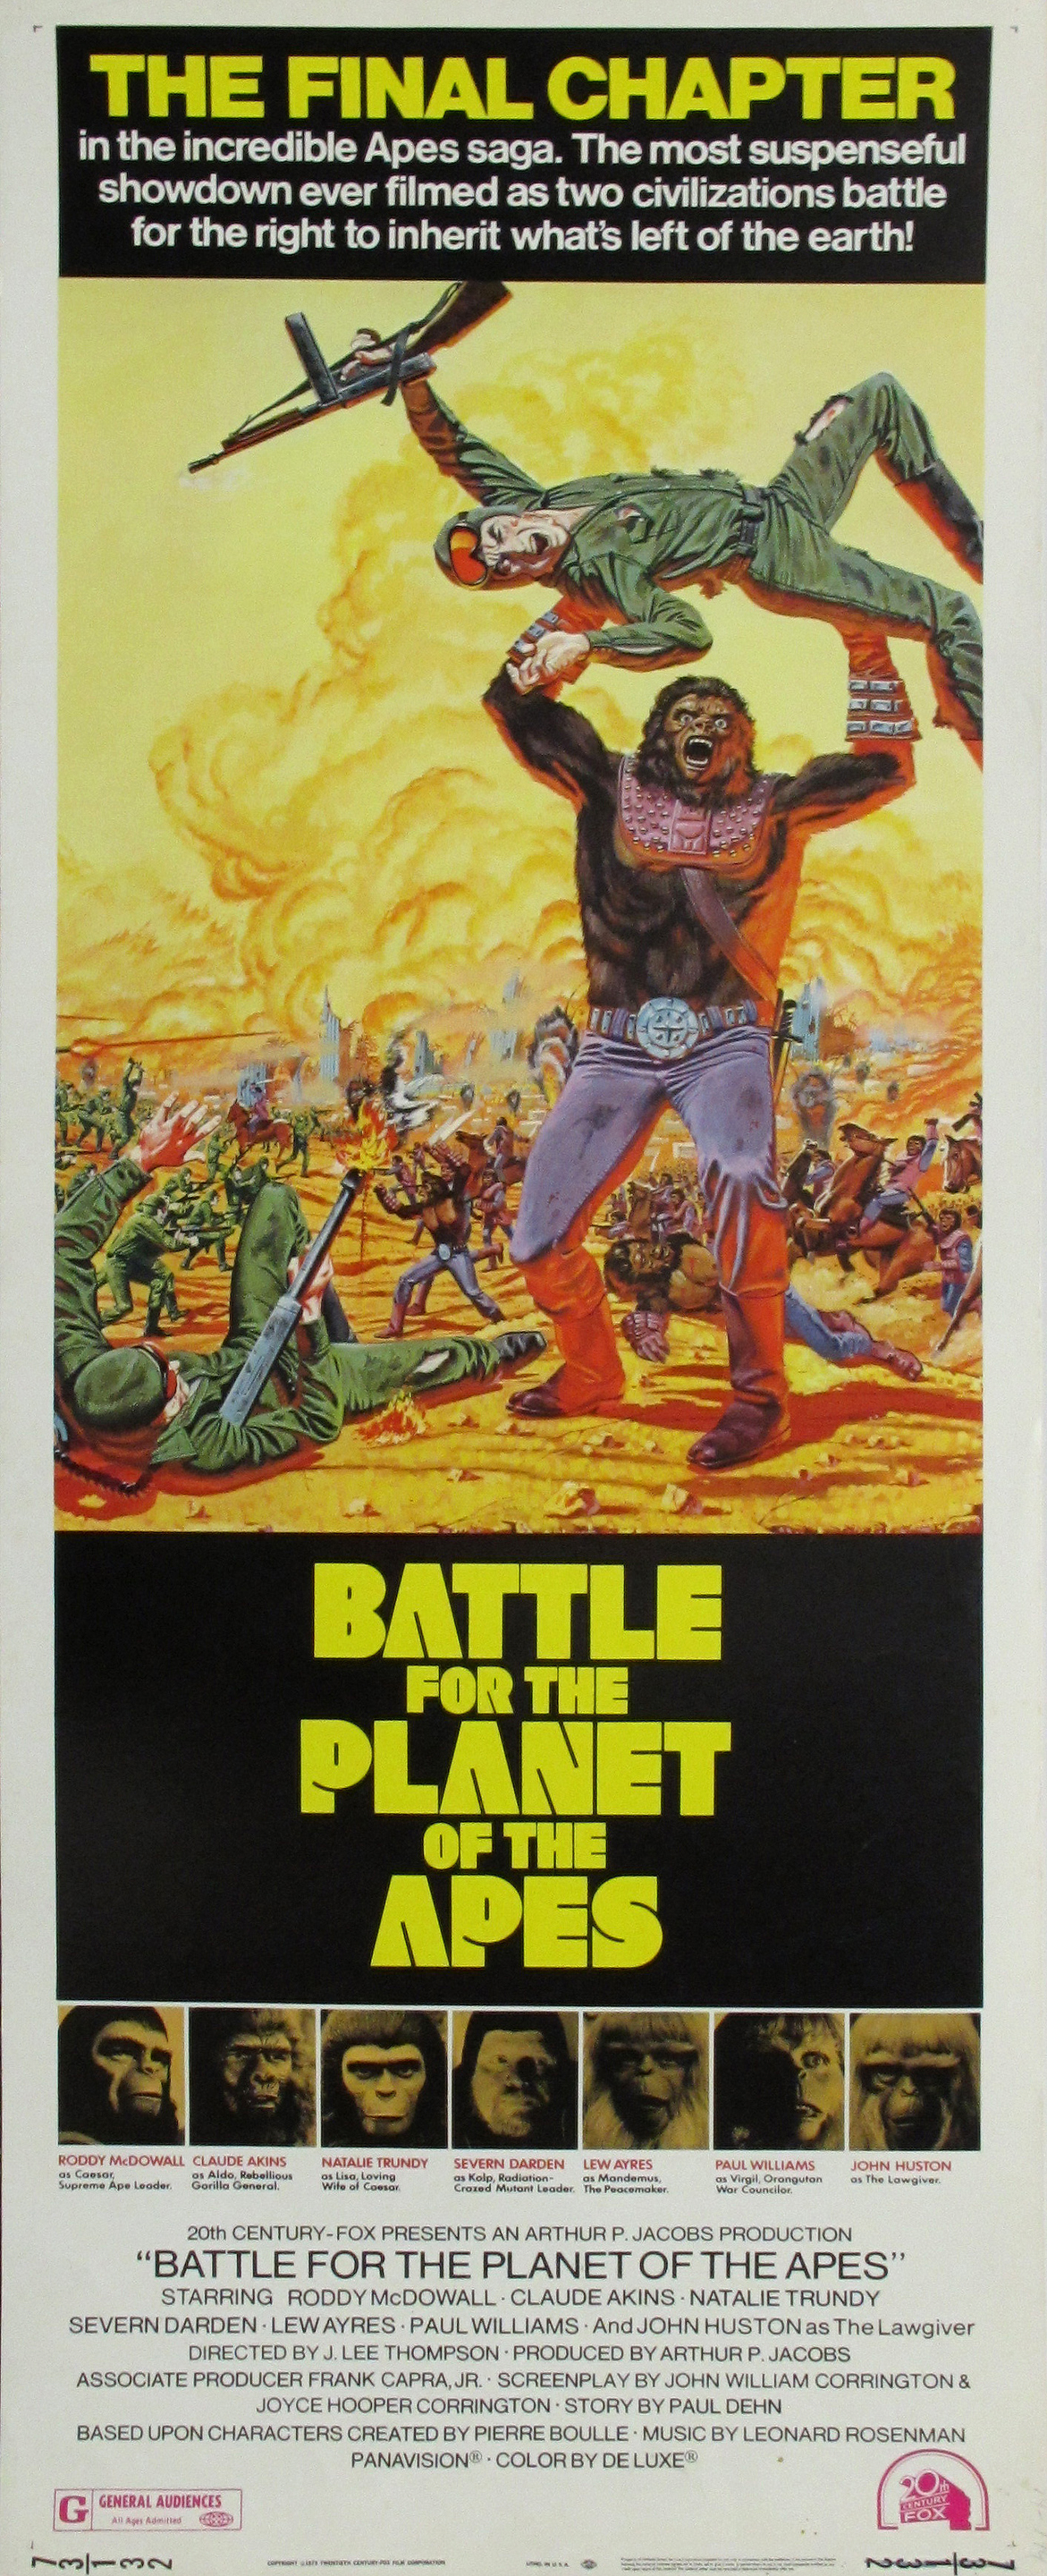 Battle for the Planet of the Apes